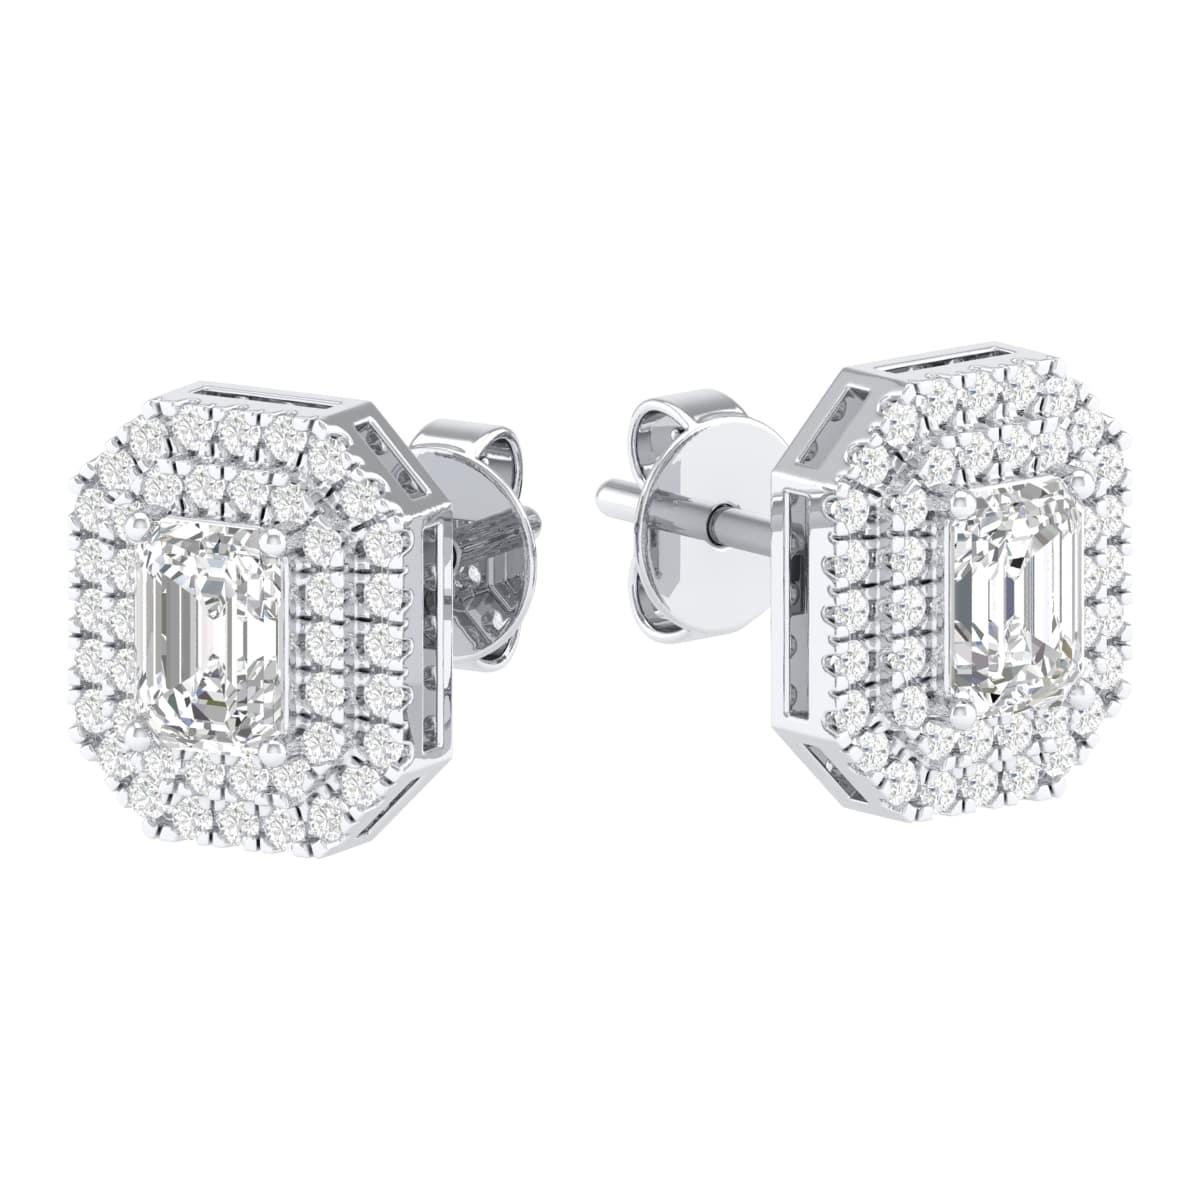 Contemporary 18 Karat White Gold 1.26 Carat Diamond Solitaire Stud Earrings For Sale